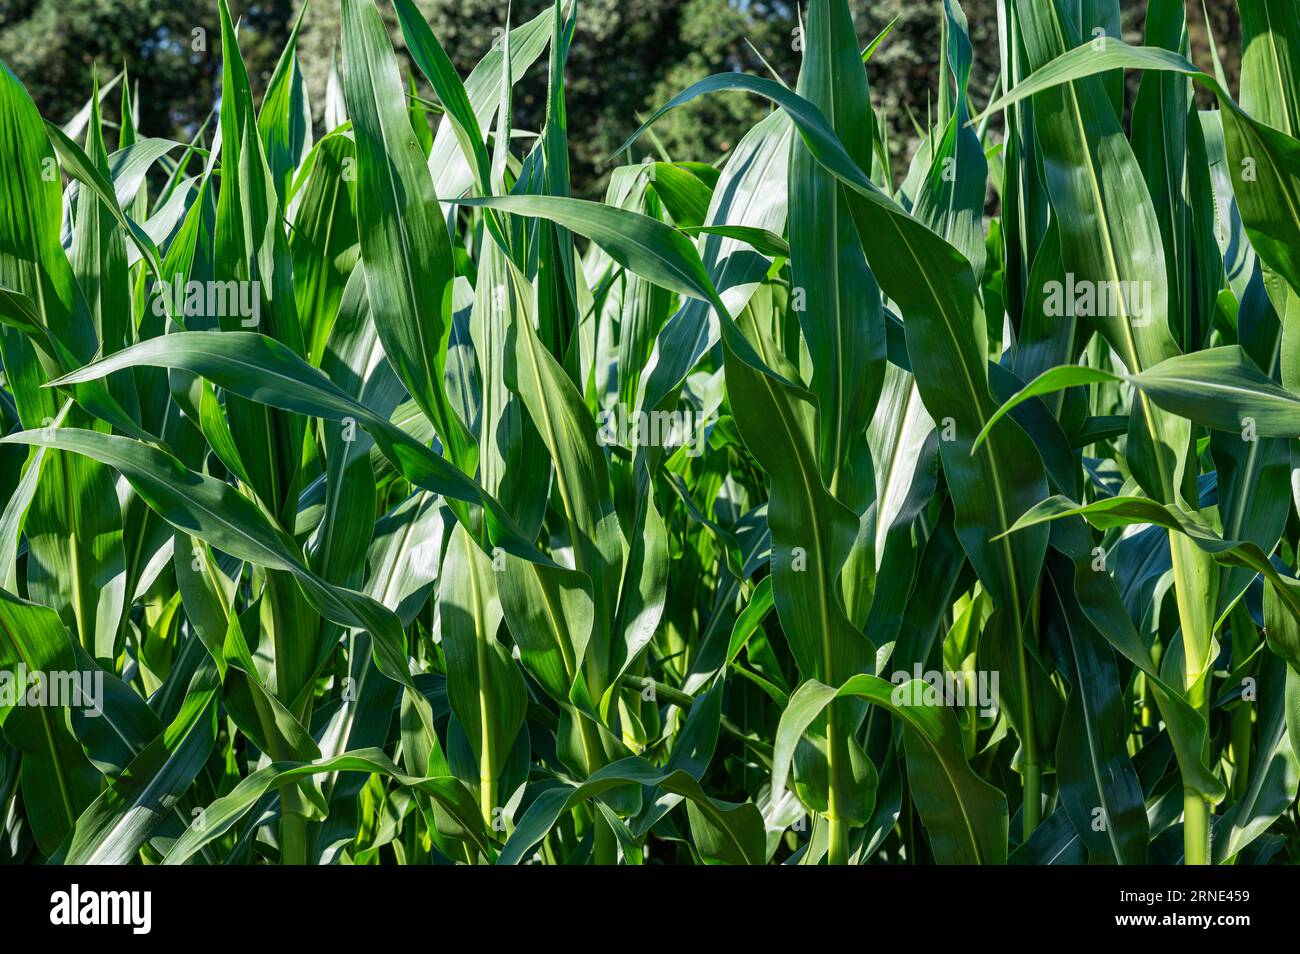 Leaves of corn plants at an agricutlure side at Viersen, North Rhine Westphalia, Germany Stock Photo